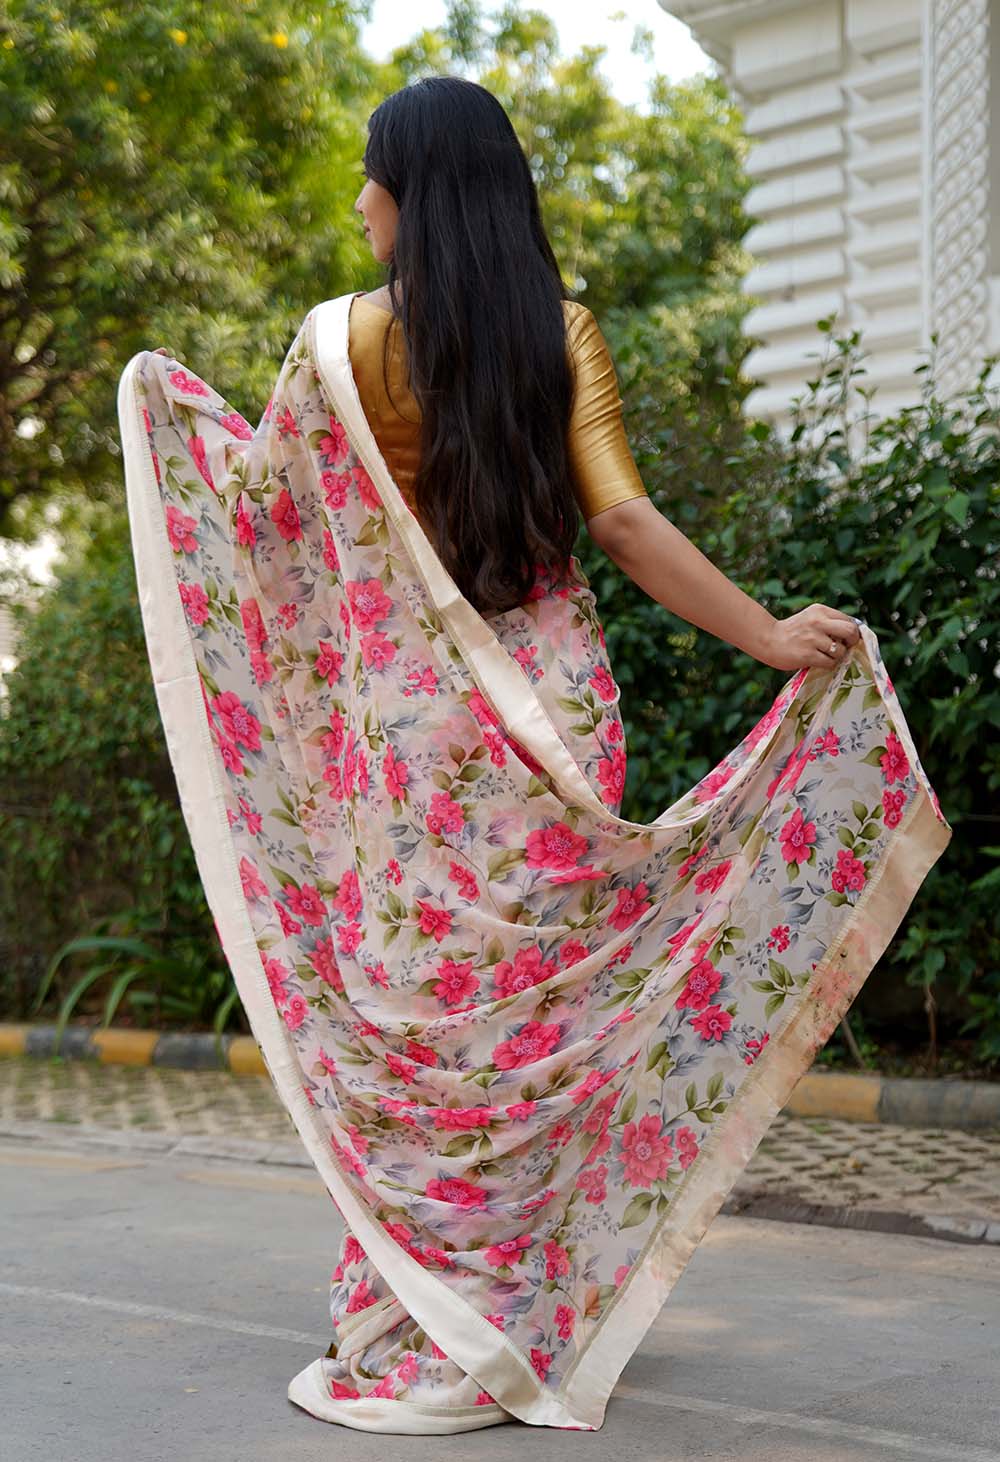 Off-White Soft Pure Georgette Floral Wrap in 1 minute saree